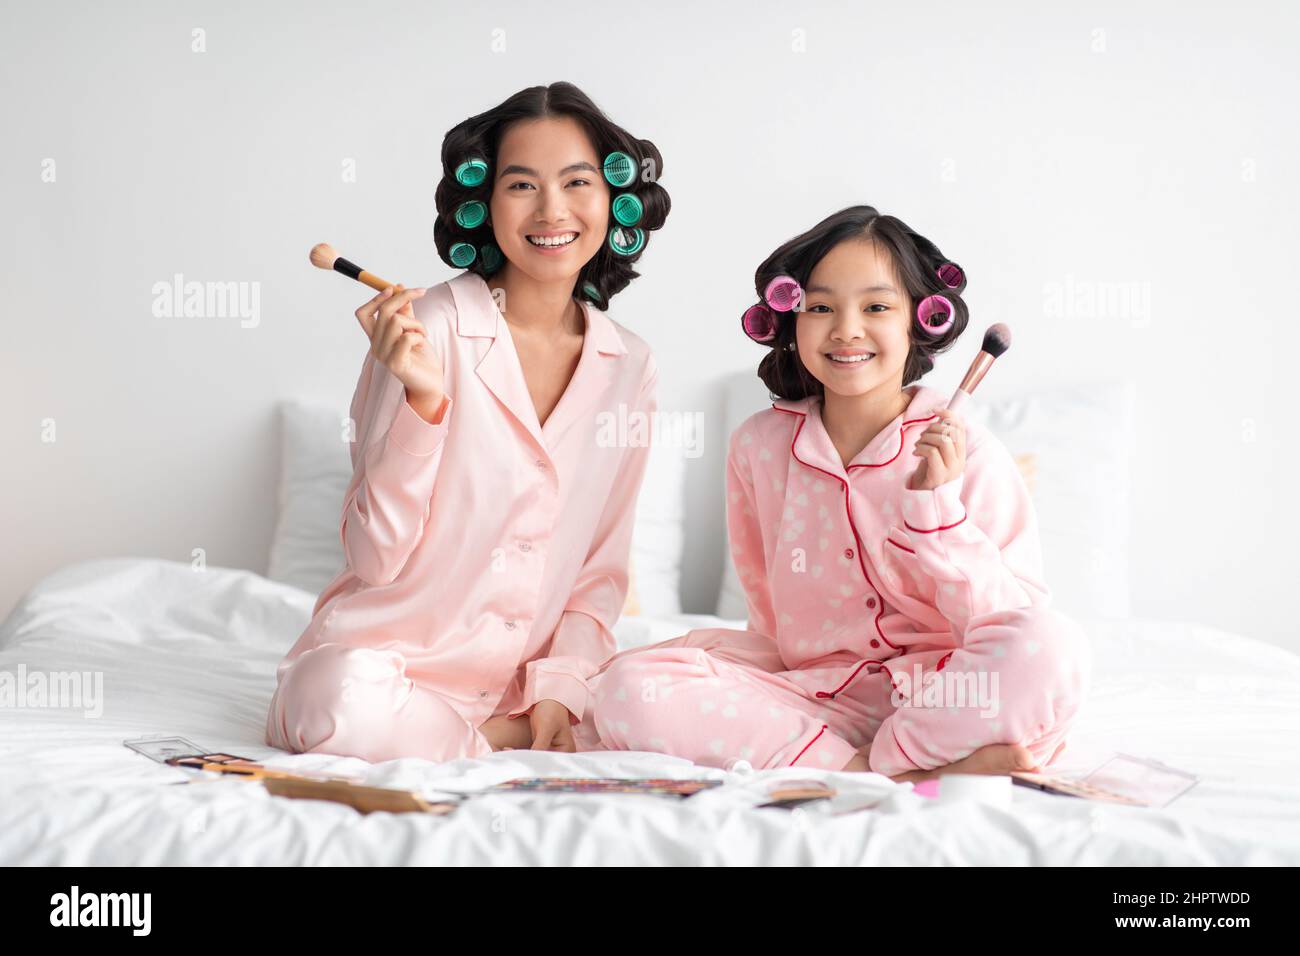 Satisfied young japanese female and teenage girl in pajamas and curlers with makeup brushes on bed Stock Photo